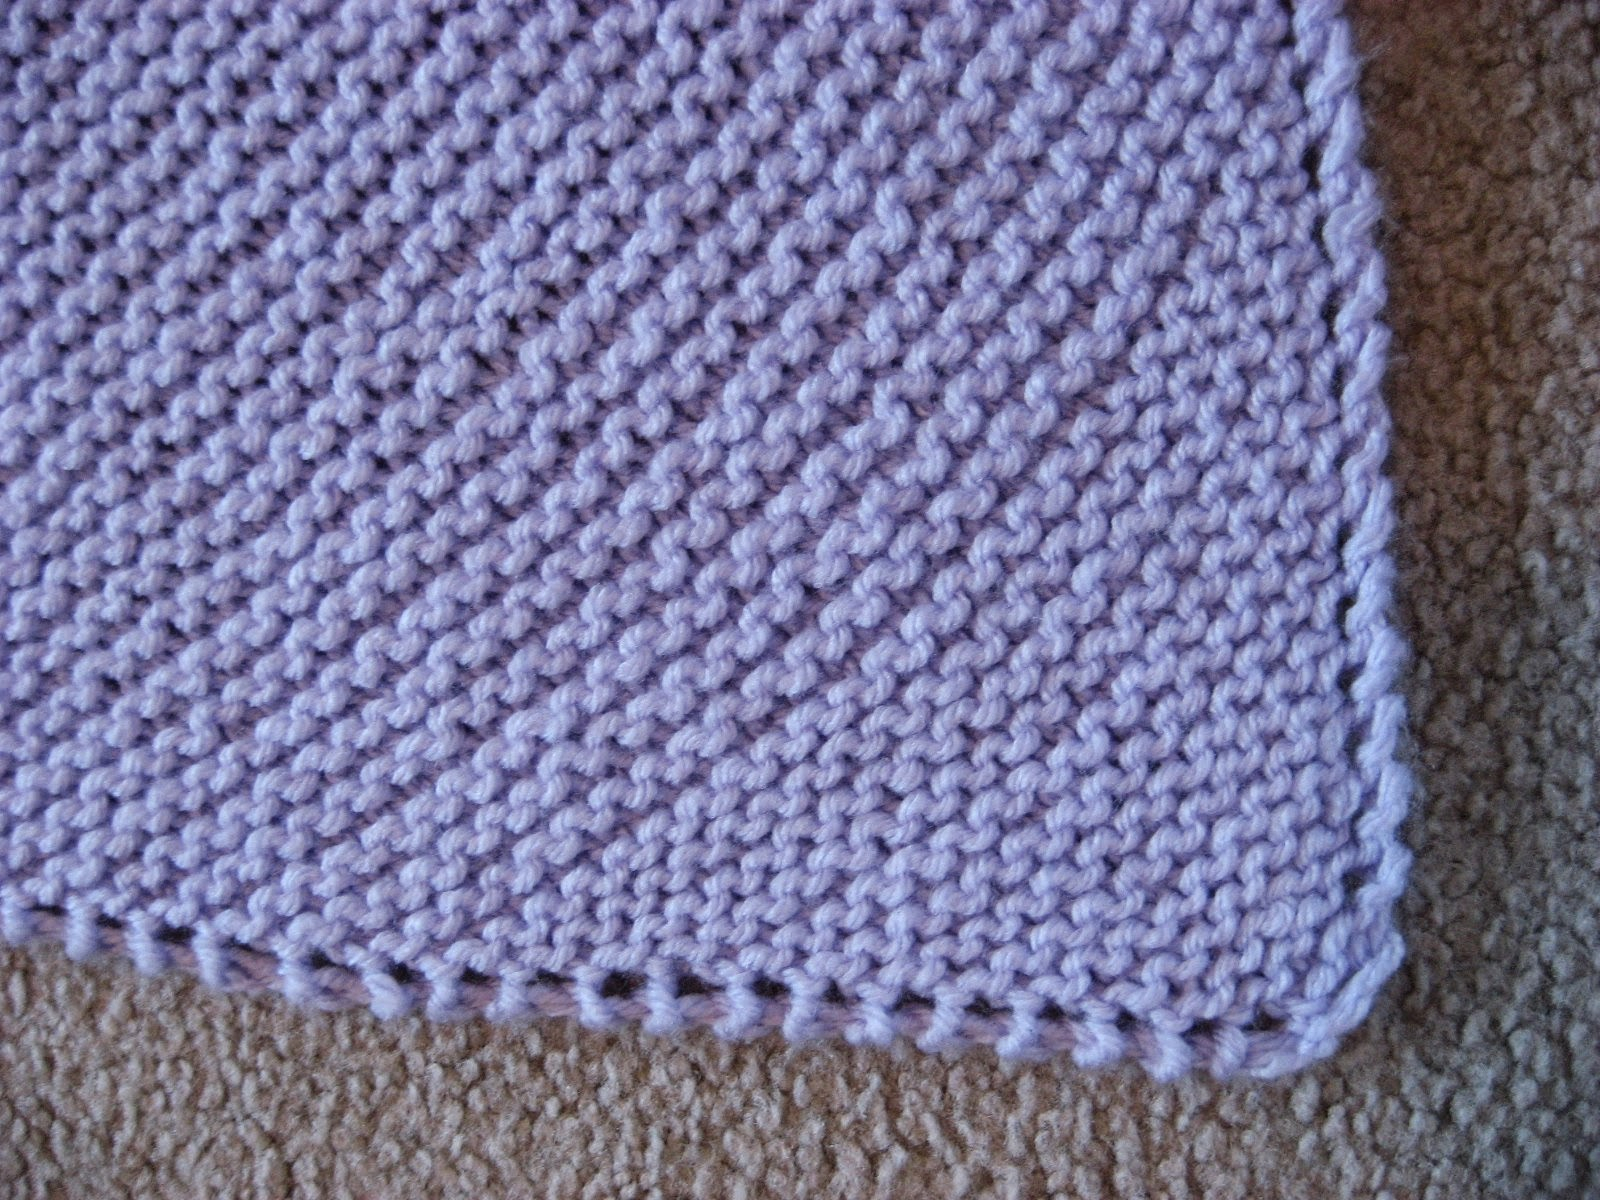 Diagonal Crochet Baby Blanket Pattern Hooked On Needles Easy Knitted Ba Blanket Instructions Included